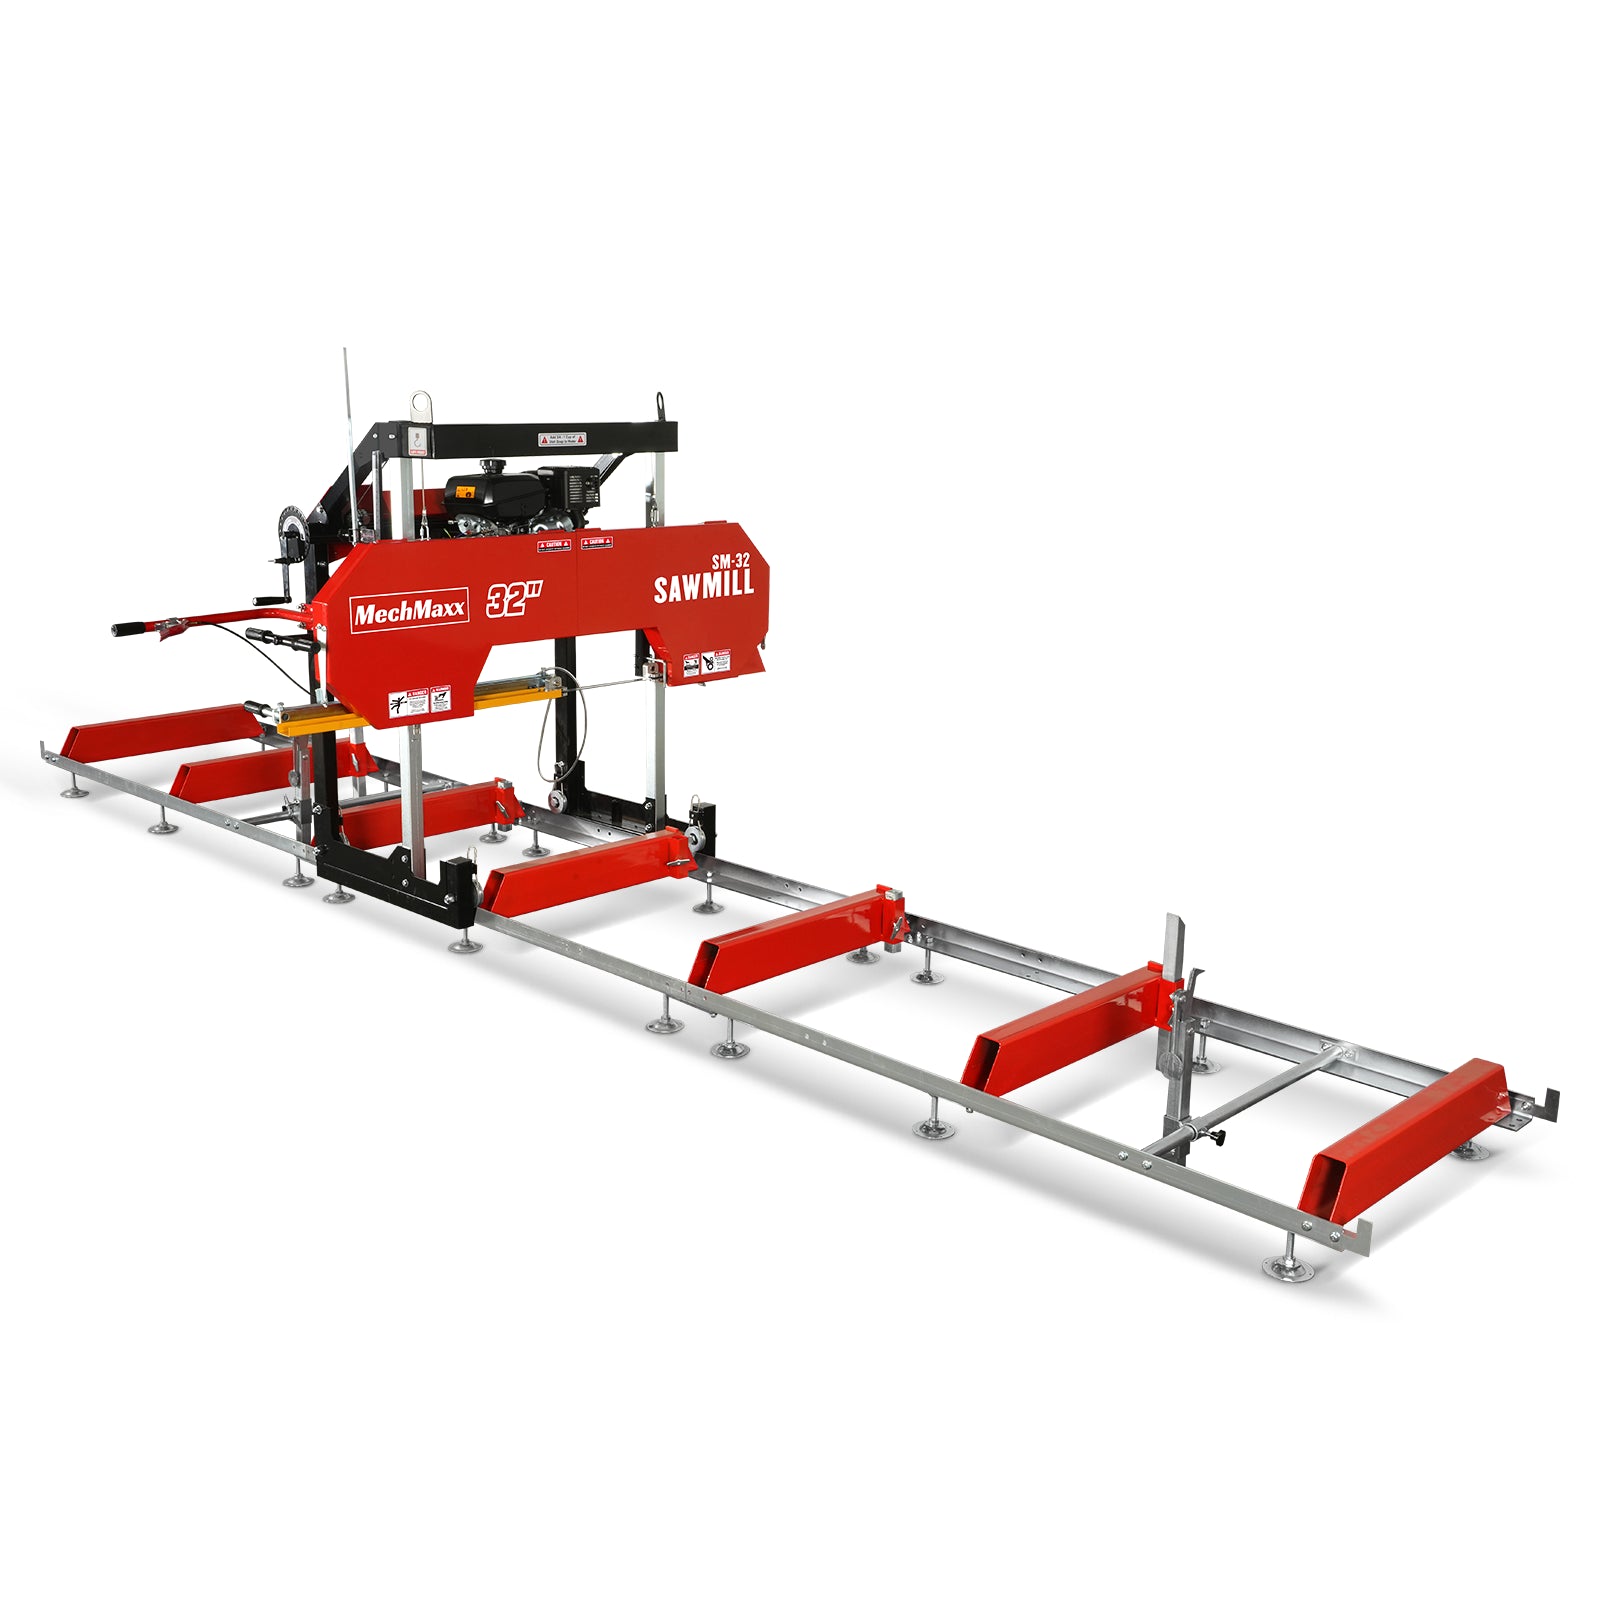 32" Portable Sawmill (5 x Blades Included),  KOHLER CH440 429cc E-Start Gasoline Engine, 29" Board Width, 20' Track Length (6.6' Track Extension Included)